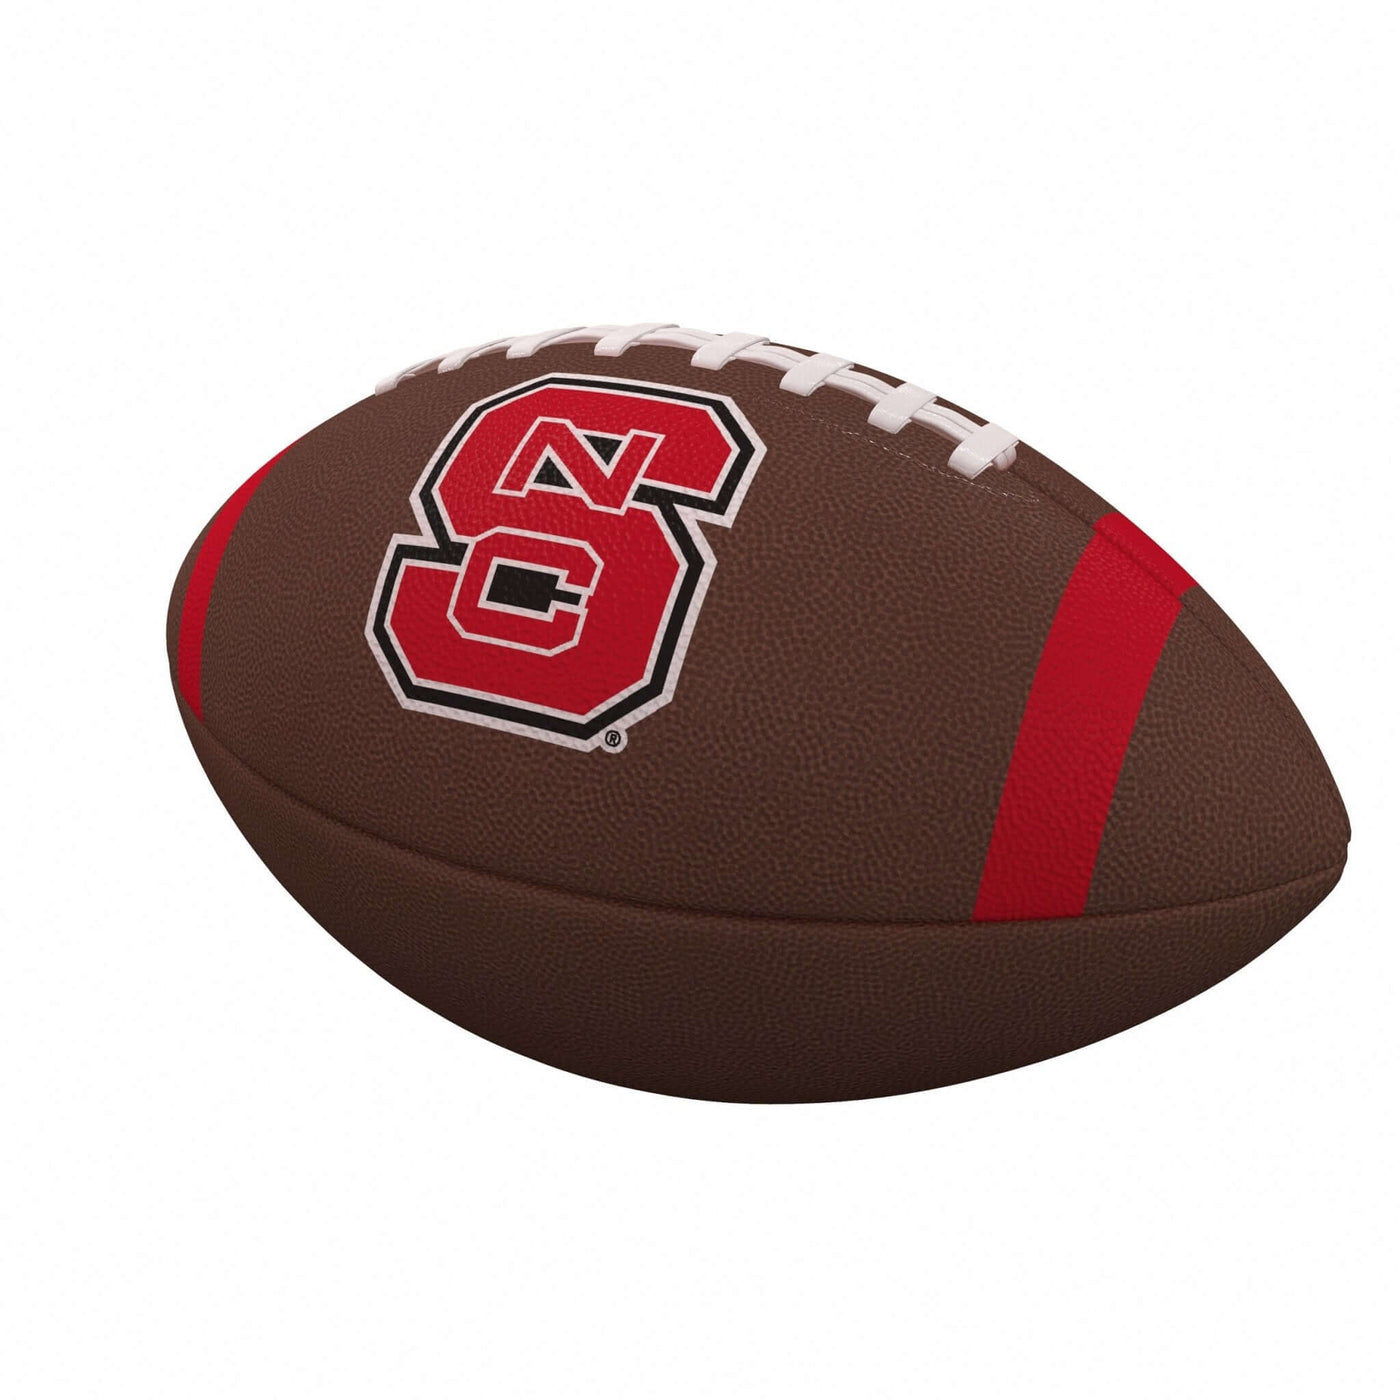 NC State Team Stripe Official-Size Composite Football - Logo Brands